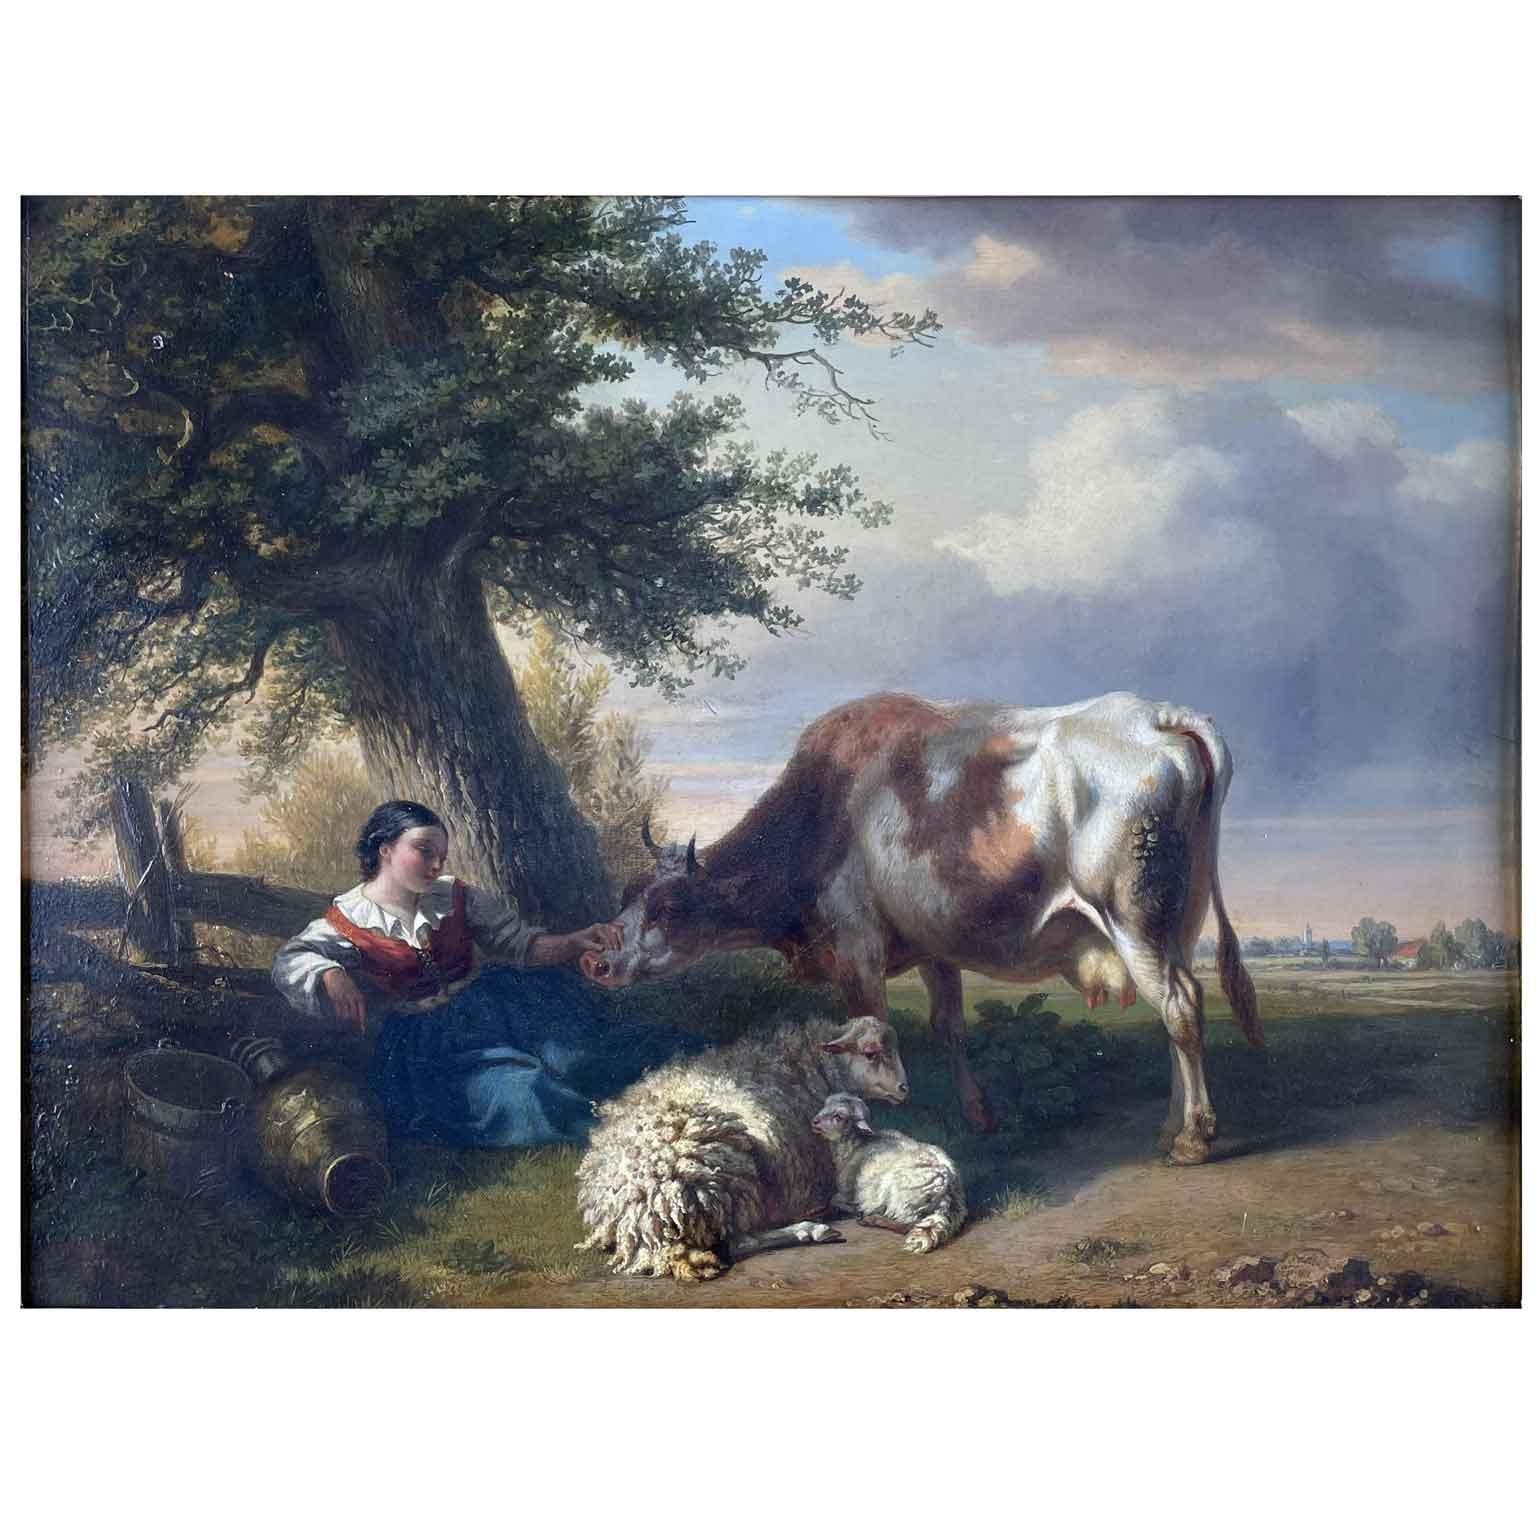 Landscape with resting shepherdess, sheep and cow, Tschaggeny 1849, signed and dated lower right by the Flemish Romantic painter and engraver Charles Philogene Tschaggeny, Bruxelles 1815-1894.

This antique oil on oak panel painting, set in modern